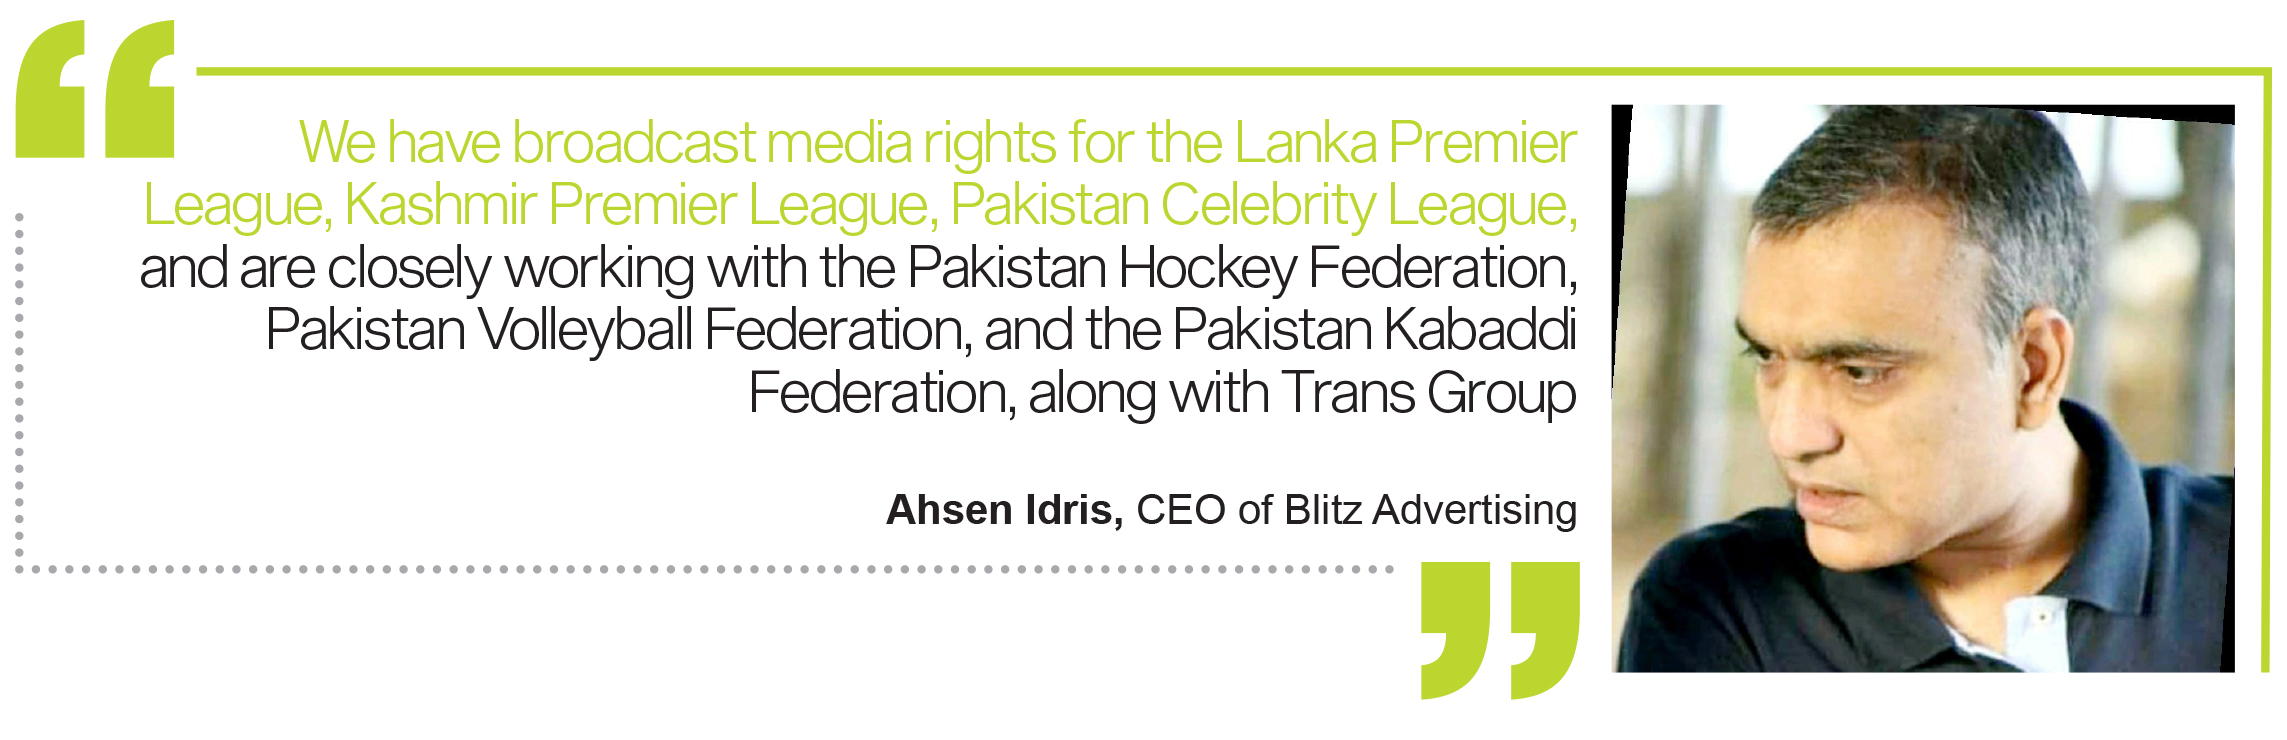 How could the PCB justify pricing the PSL media rights at $100 million?